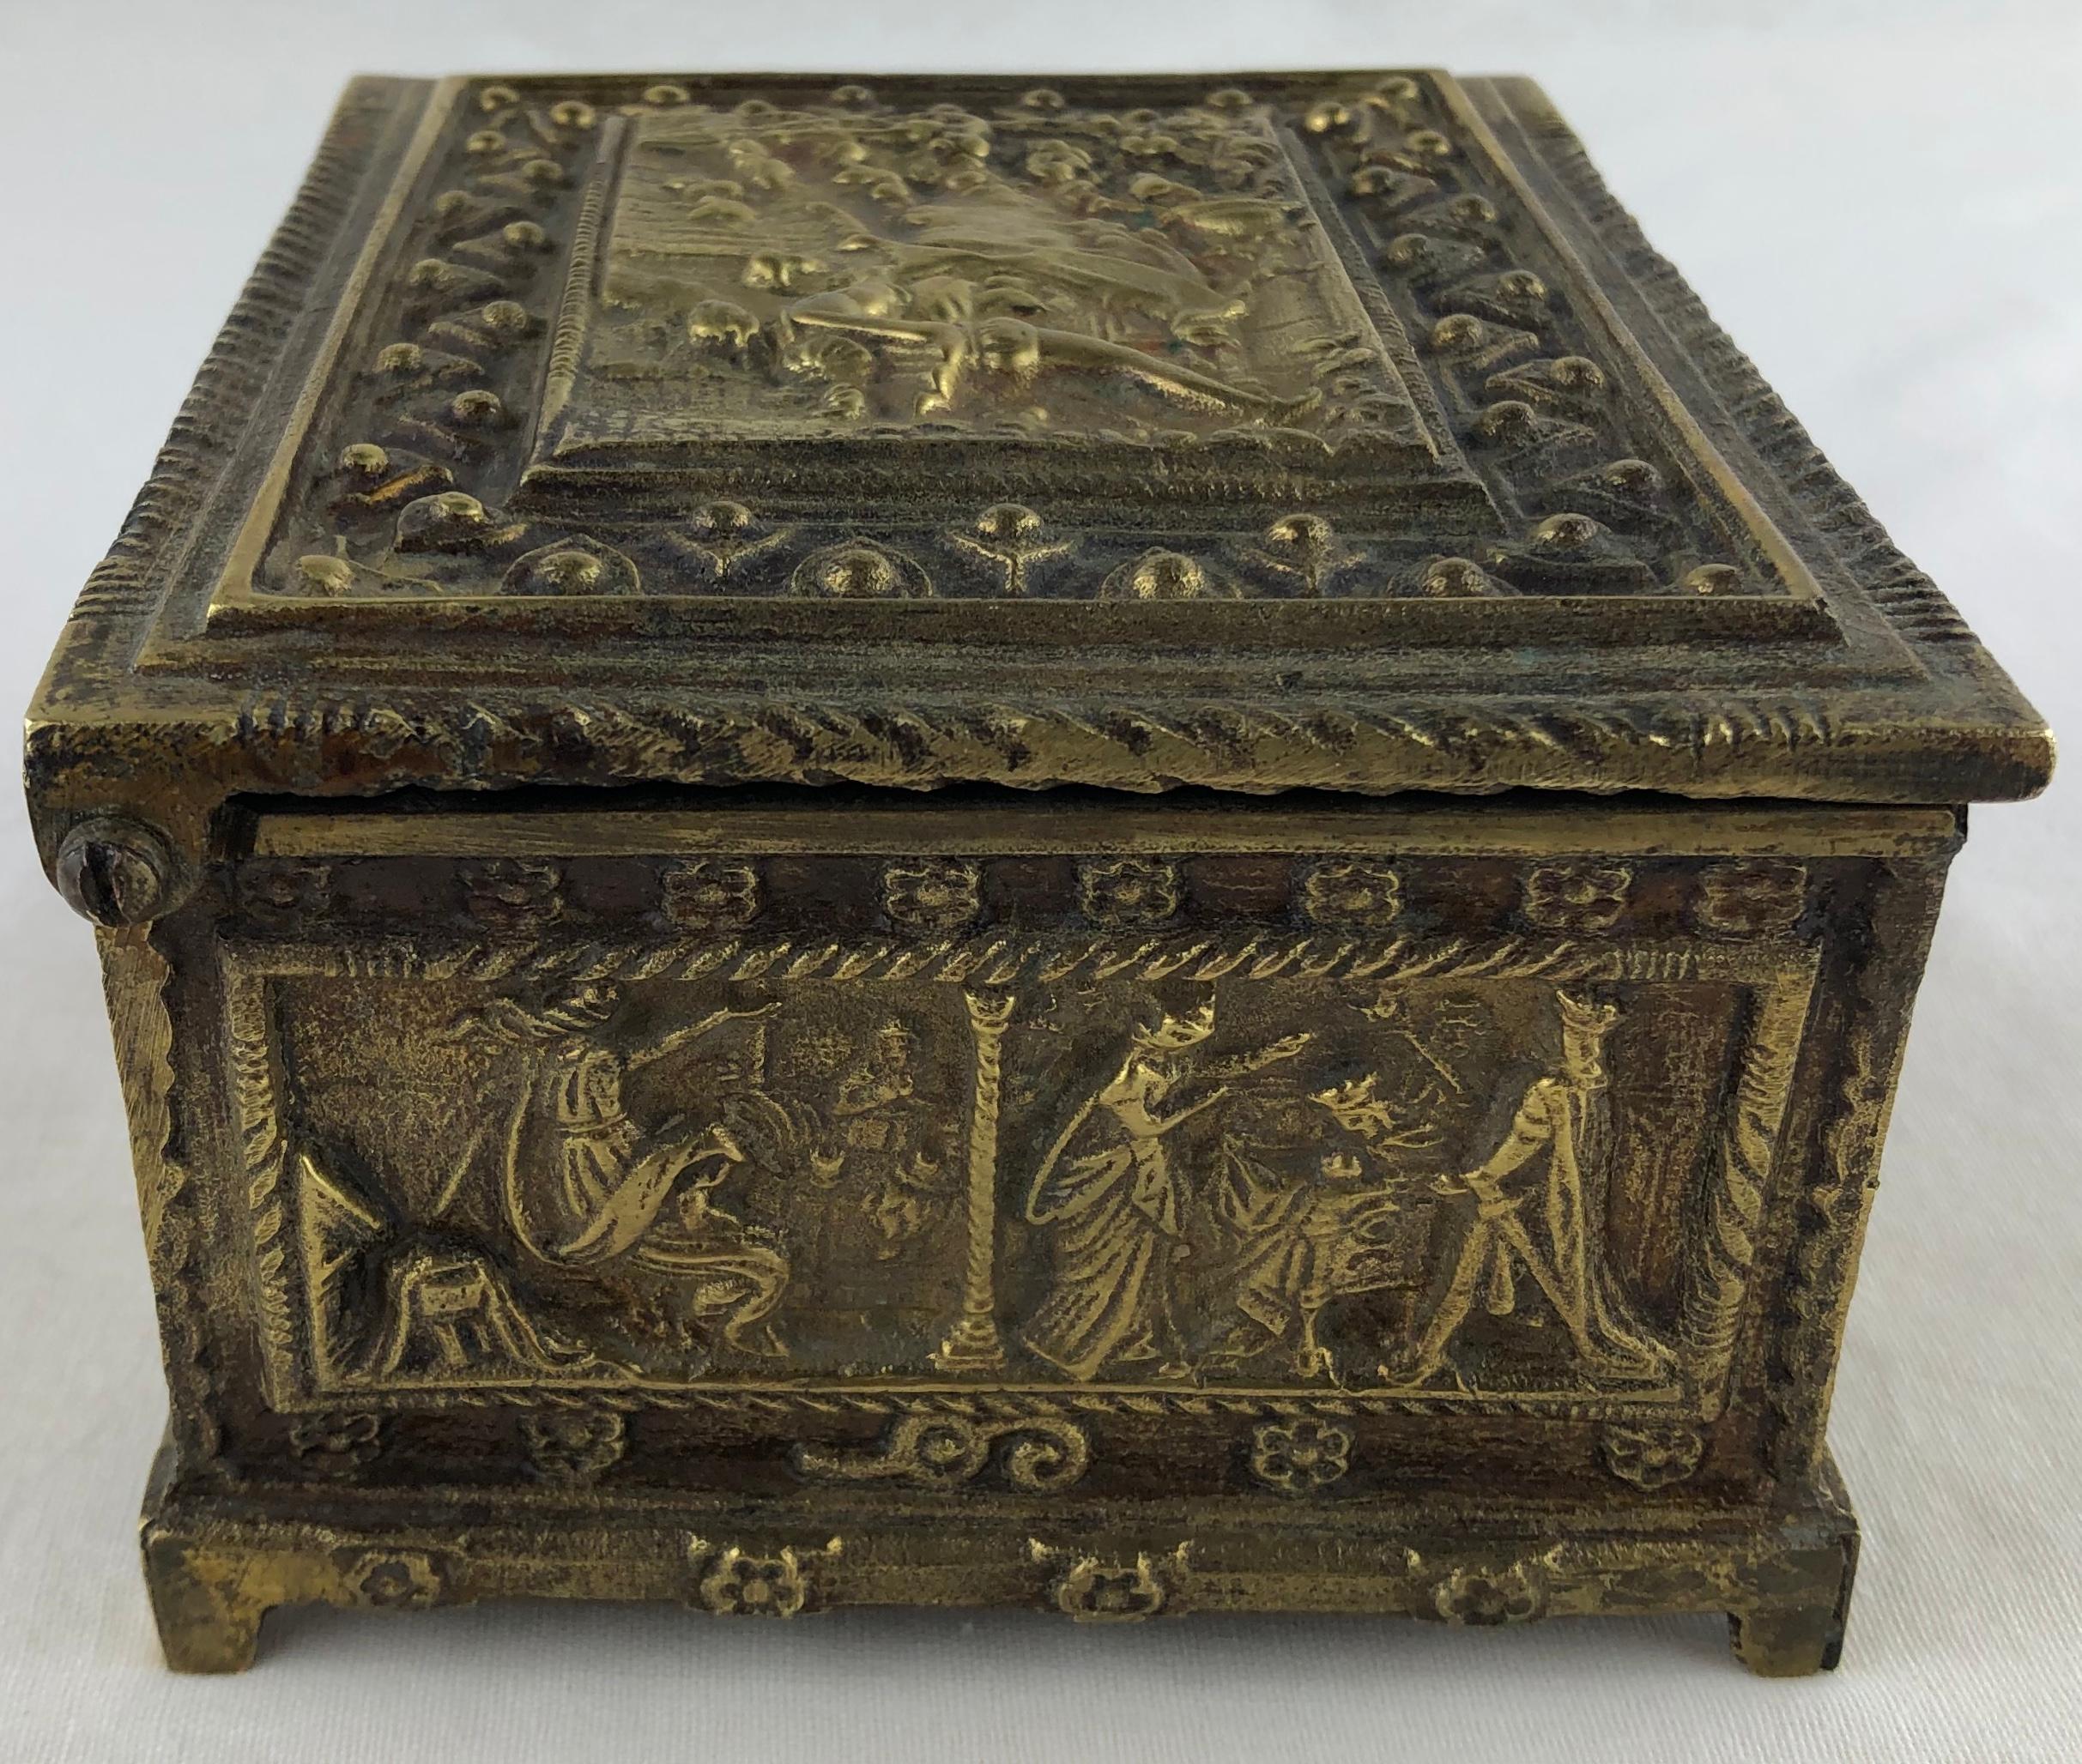 Hand-Crafted French Bronze Jewelry Box with High Reliefs, circa 1880